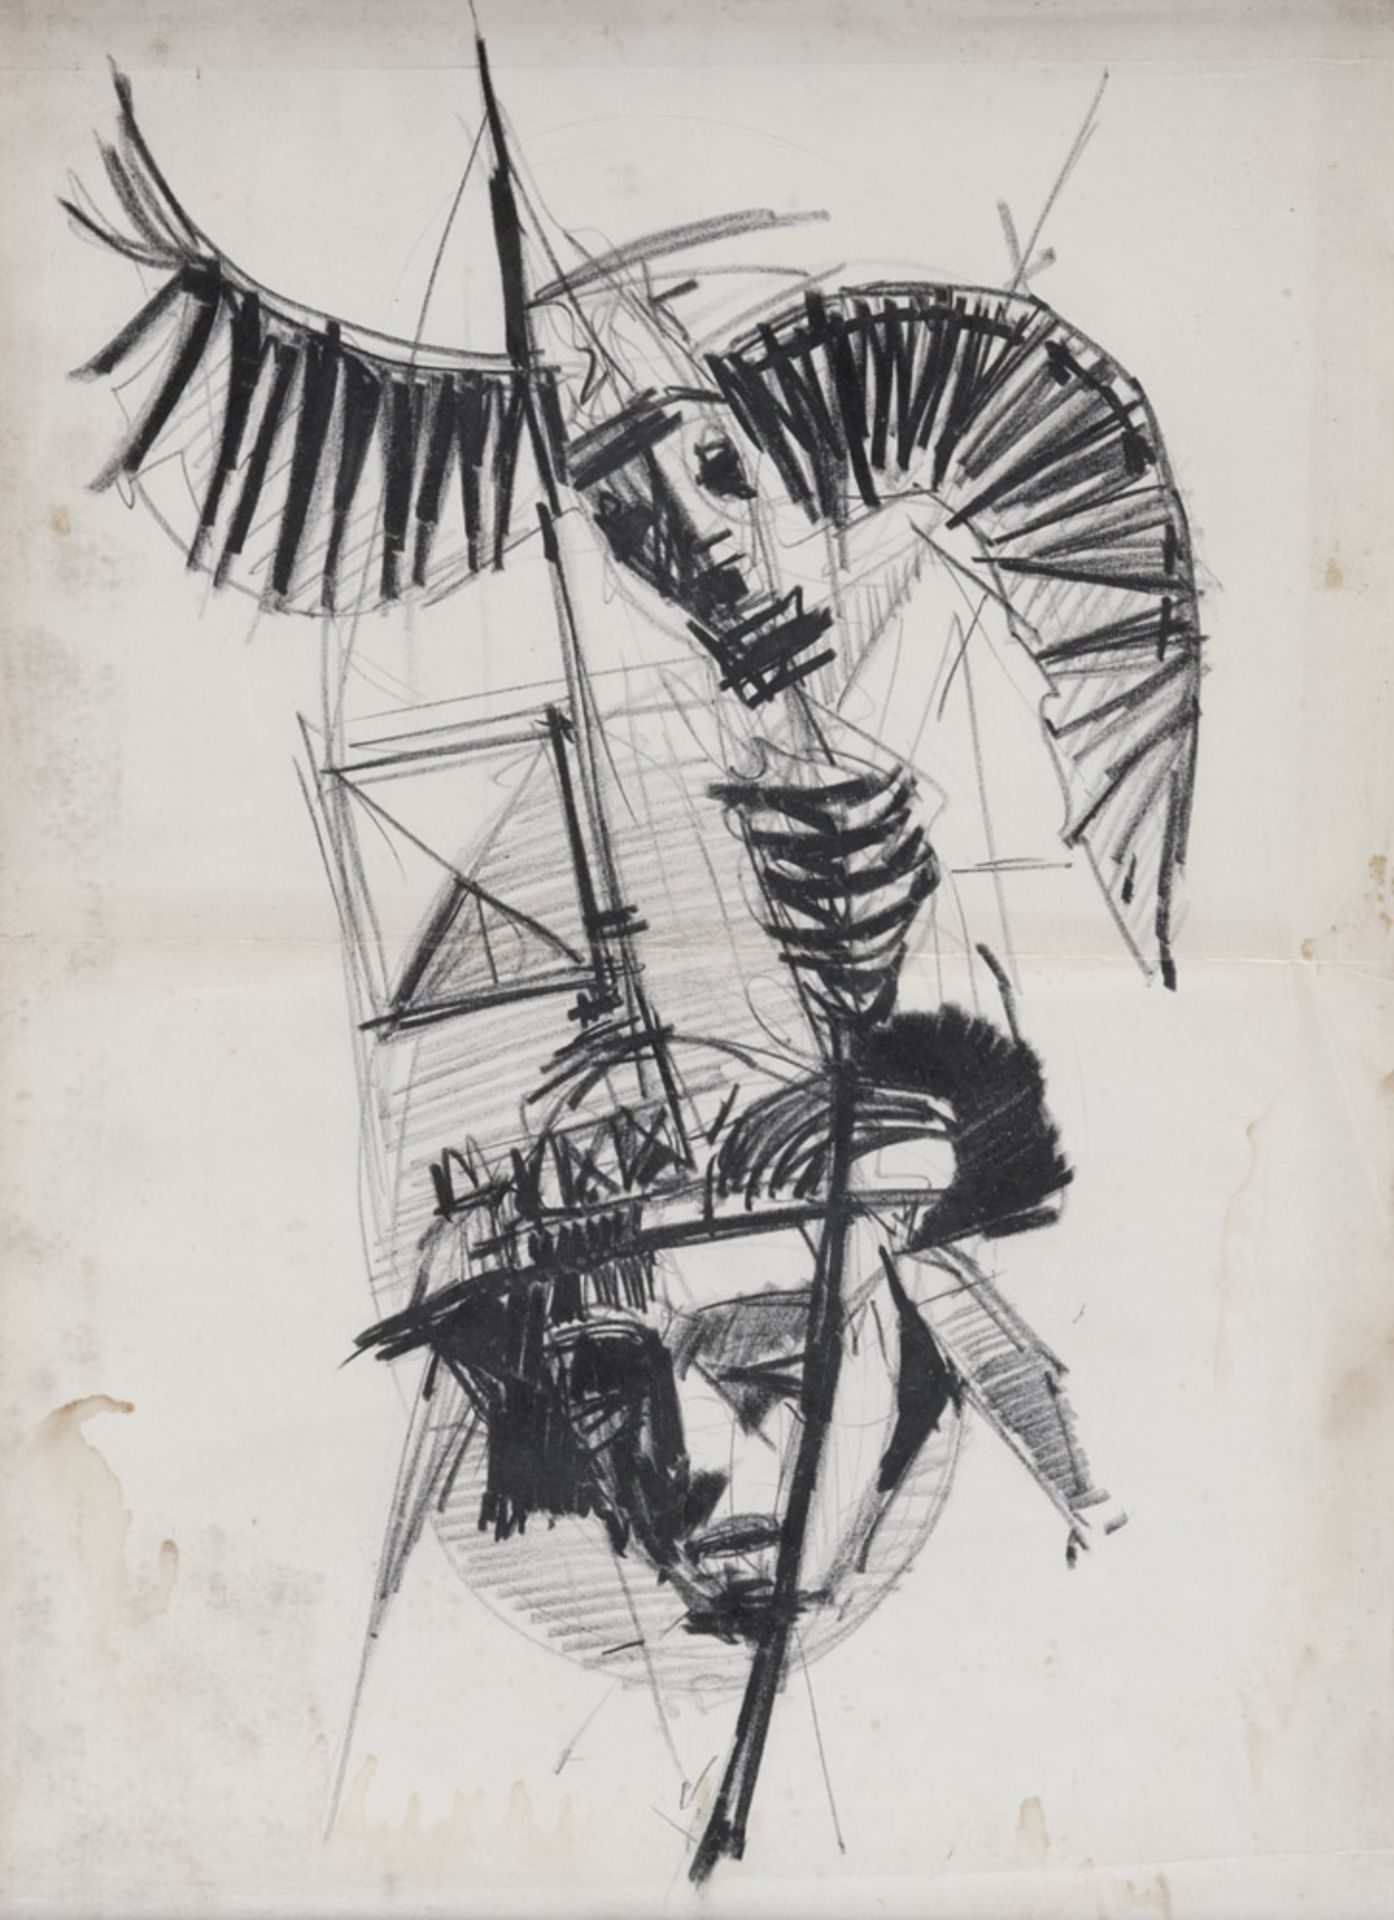 FRANK GARELLI (Dawn 1909 - 1973) Without title, years '60 Pencil and carboncino on paper, cm. 44 x